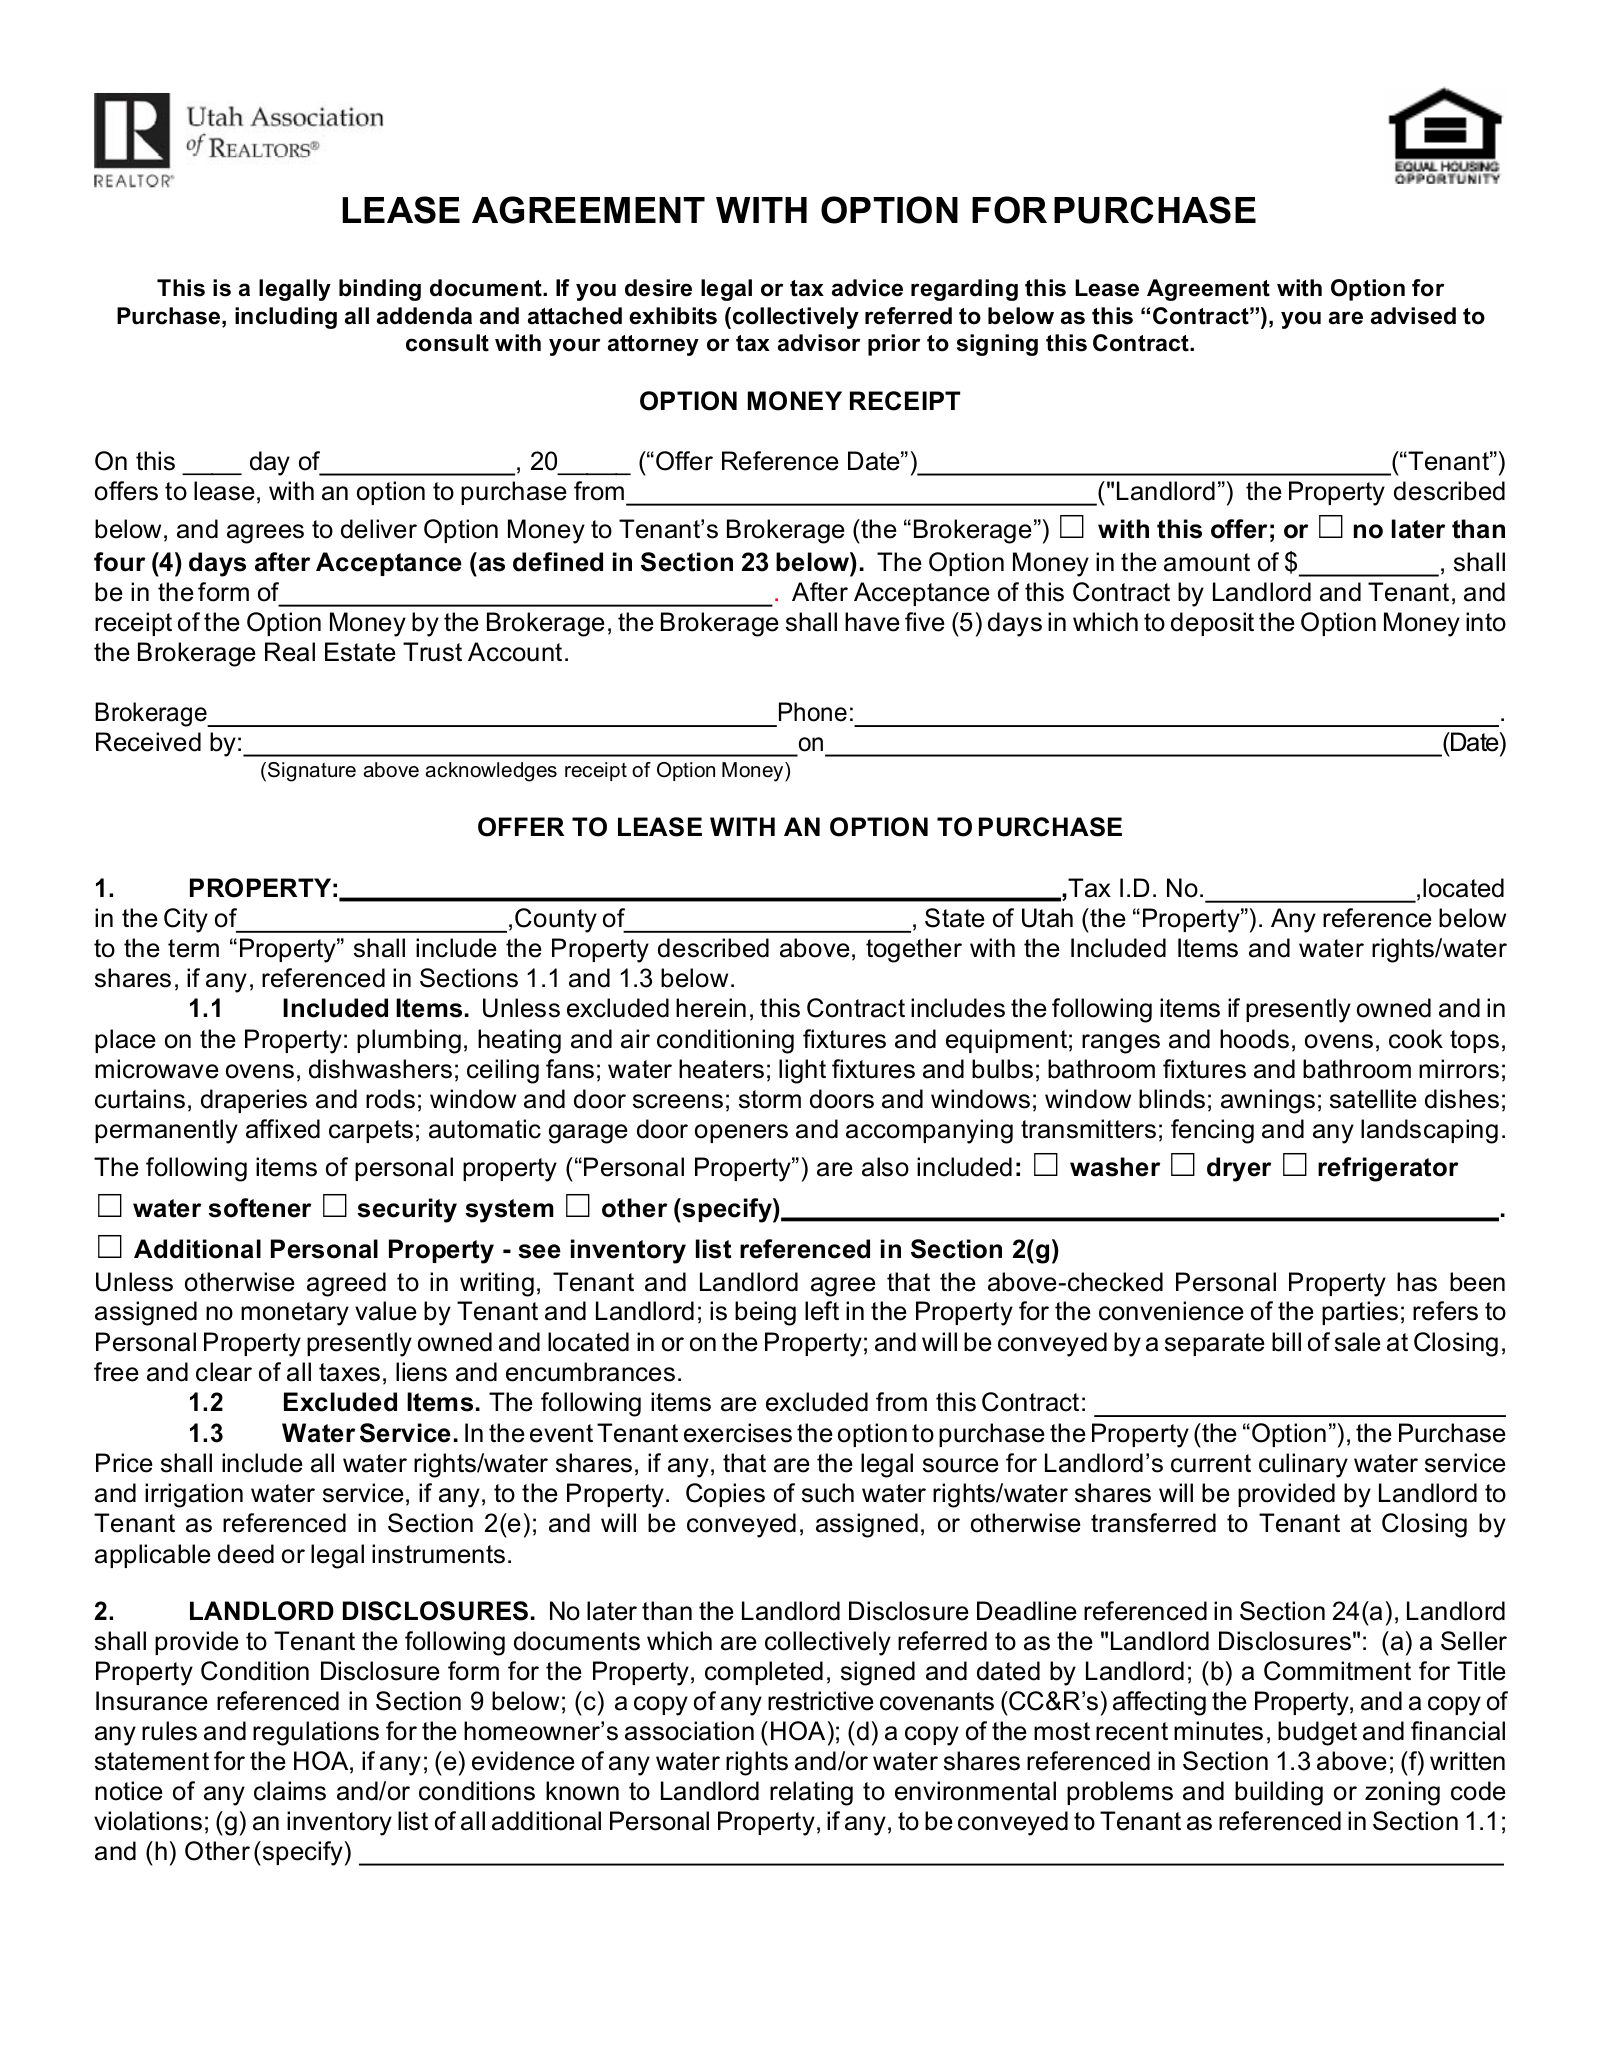 free-utah-lease-agreement-with-option-to-purchase-form-word-pdf